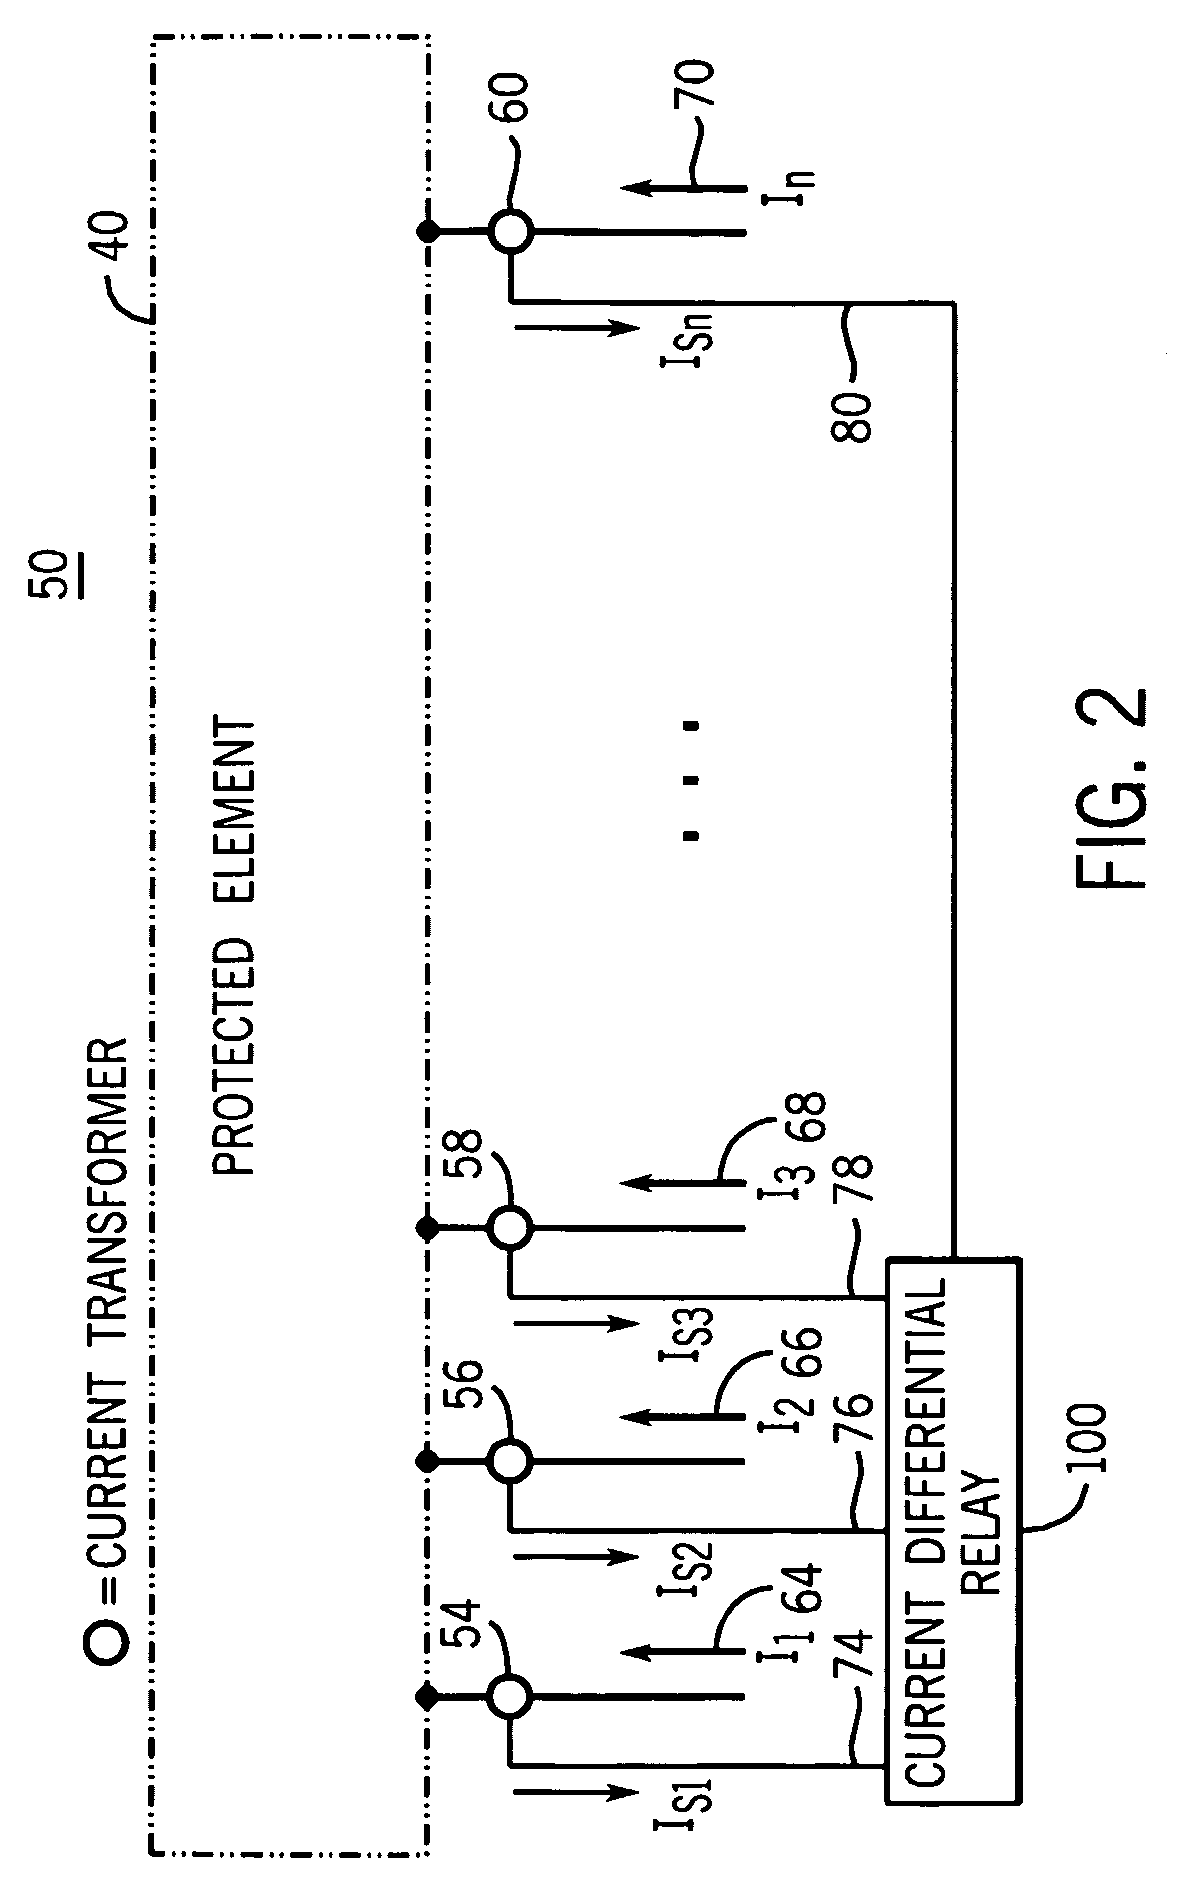 Apparatus and method for detecting the loss of a current transformer connection coupling a current differential relay to an element of a power system